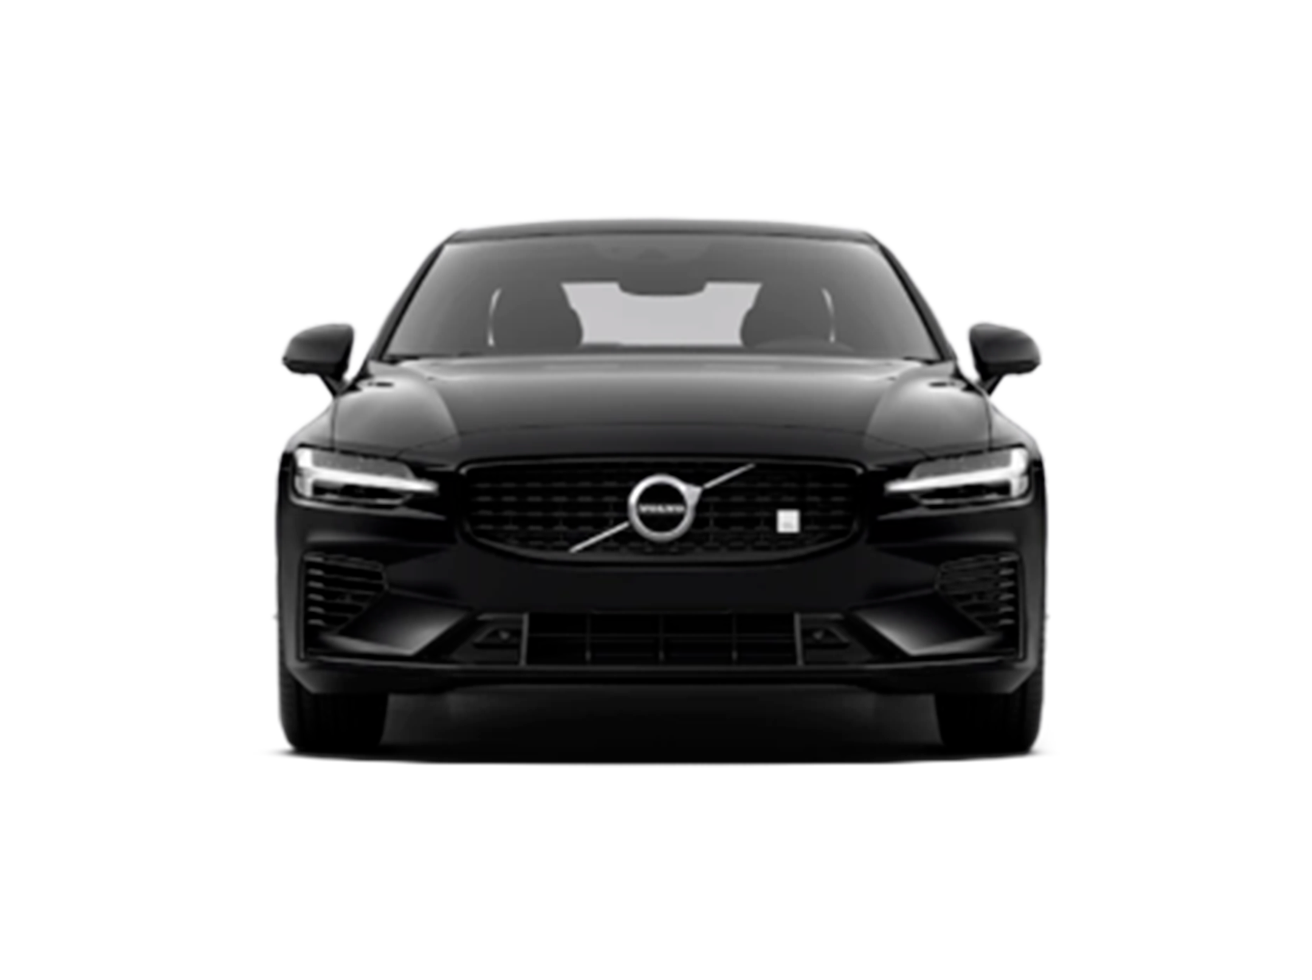 2.0 T8 RECHARGE POLESTAR ENGINEERED AWD GEARTRONIC